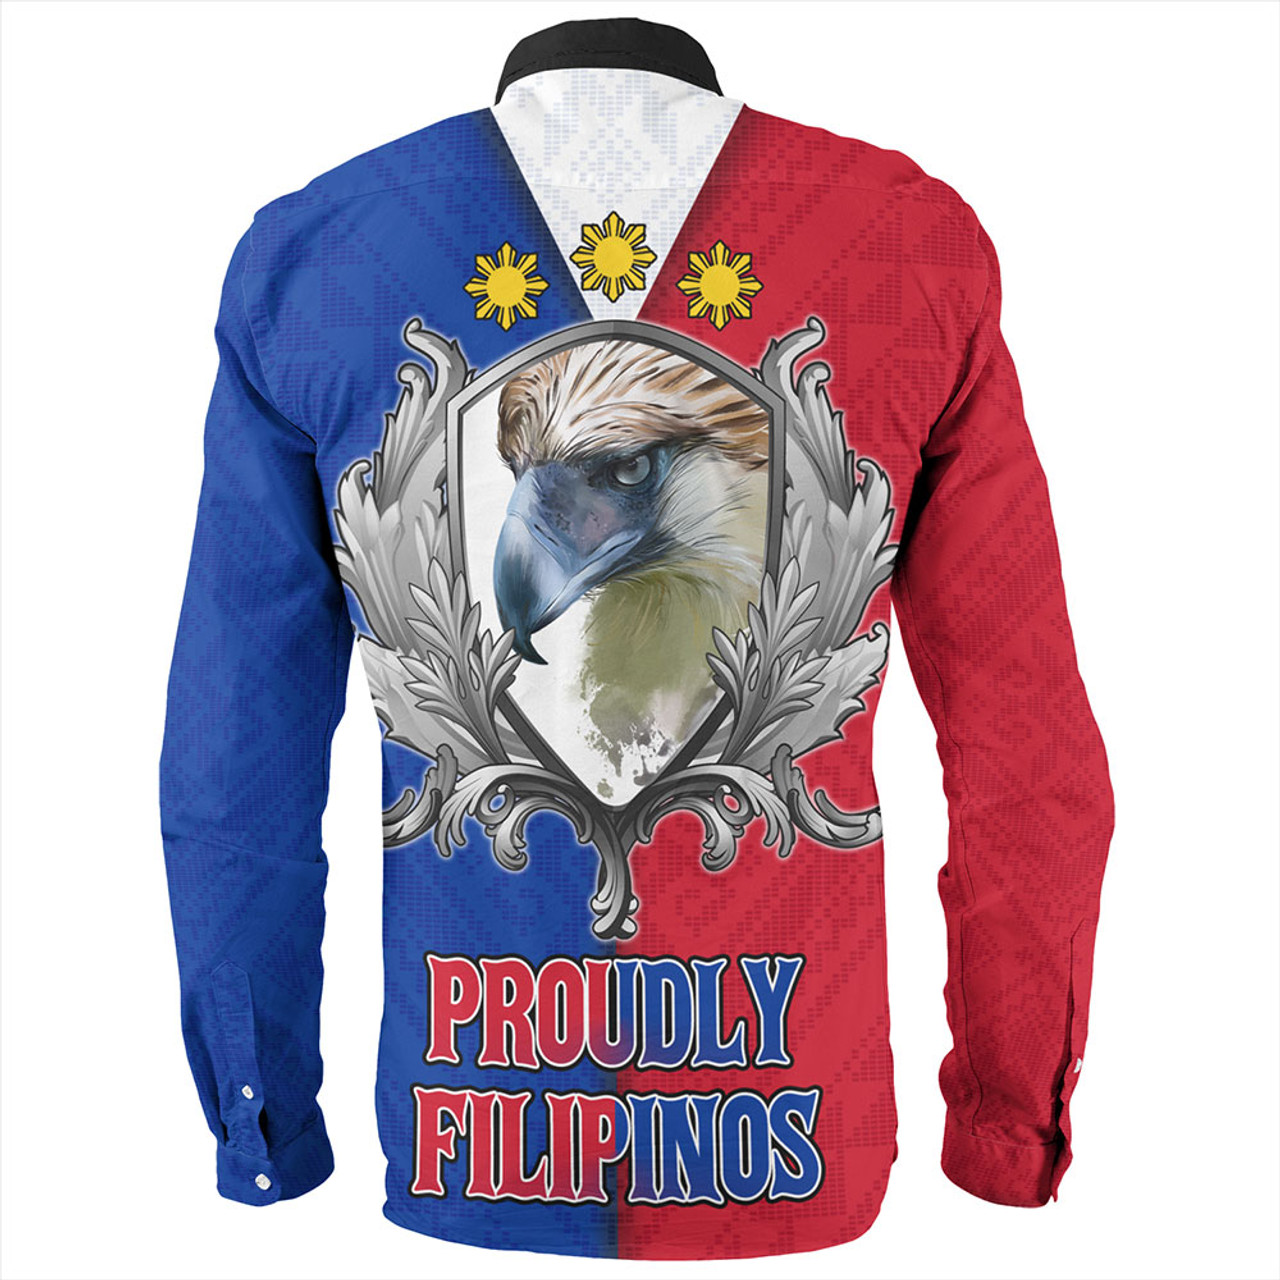 Philippines Filipinos Long Sleeve Shirt The Philippine Eagle With Traditional Patterns